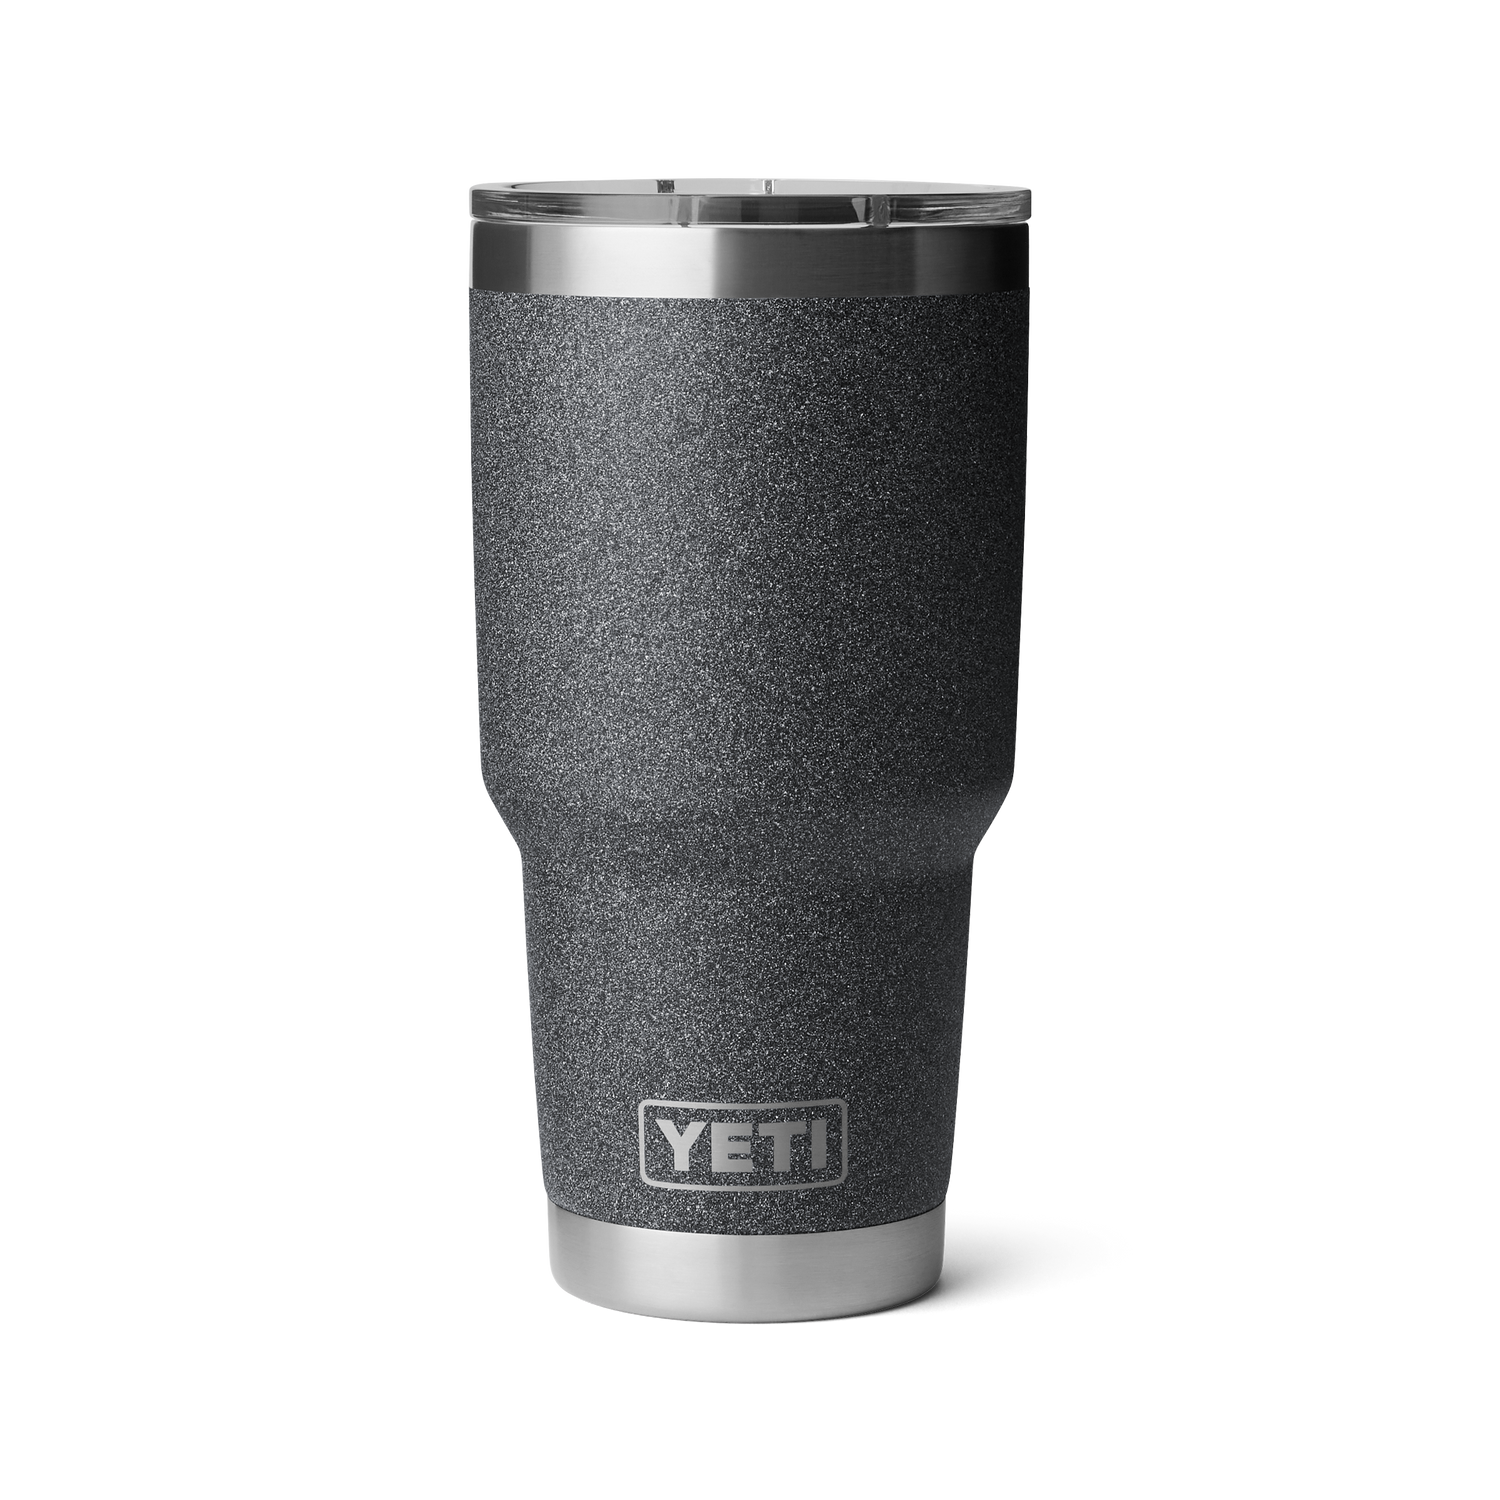 5 Common Yeti Gasket Problems and How To Fix Them